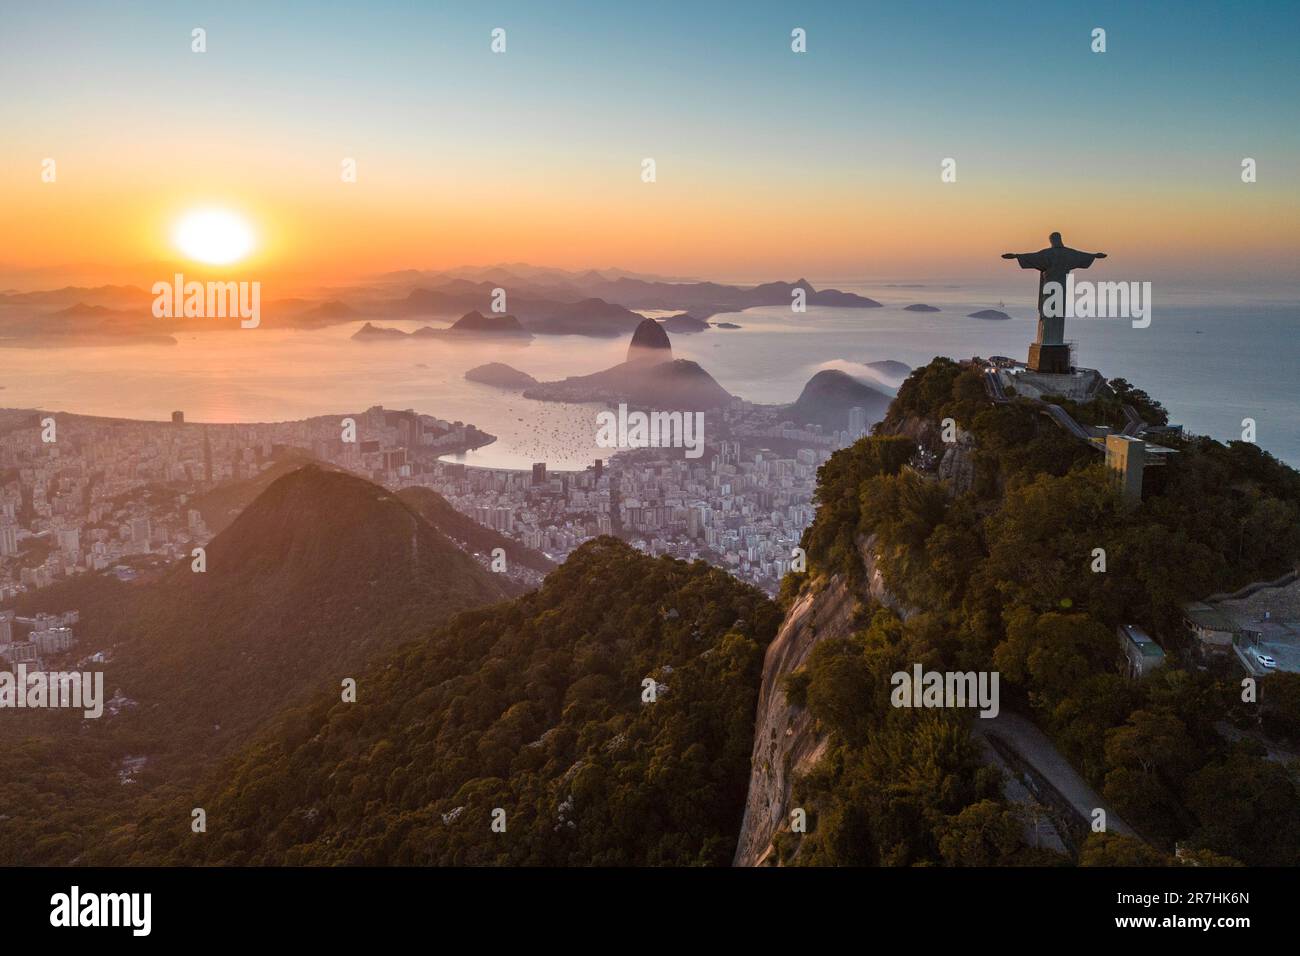 Rio de Janeiro, Brazil - June 10, 2023: Christ the Redeemer statue on top of Corcovado Mountain with the Sugarloaf Mountain in the horizon on sunrise. Stock Photo